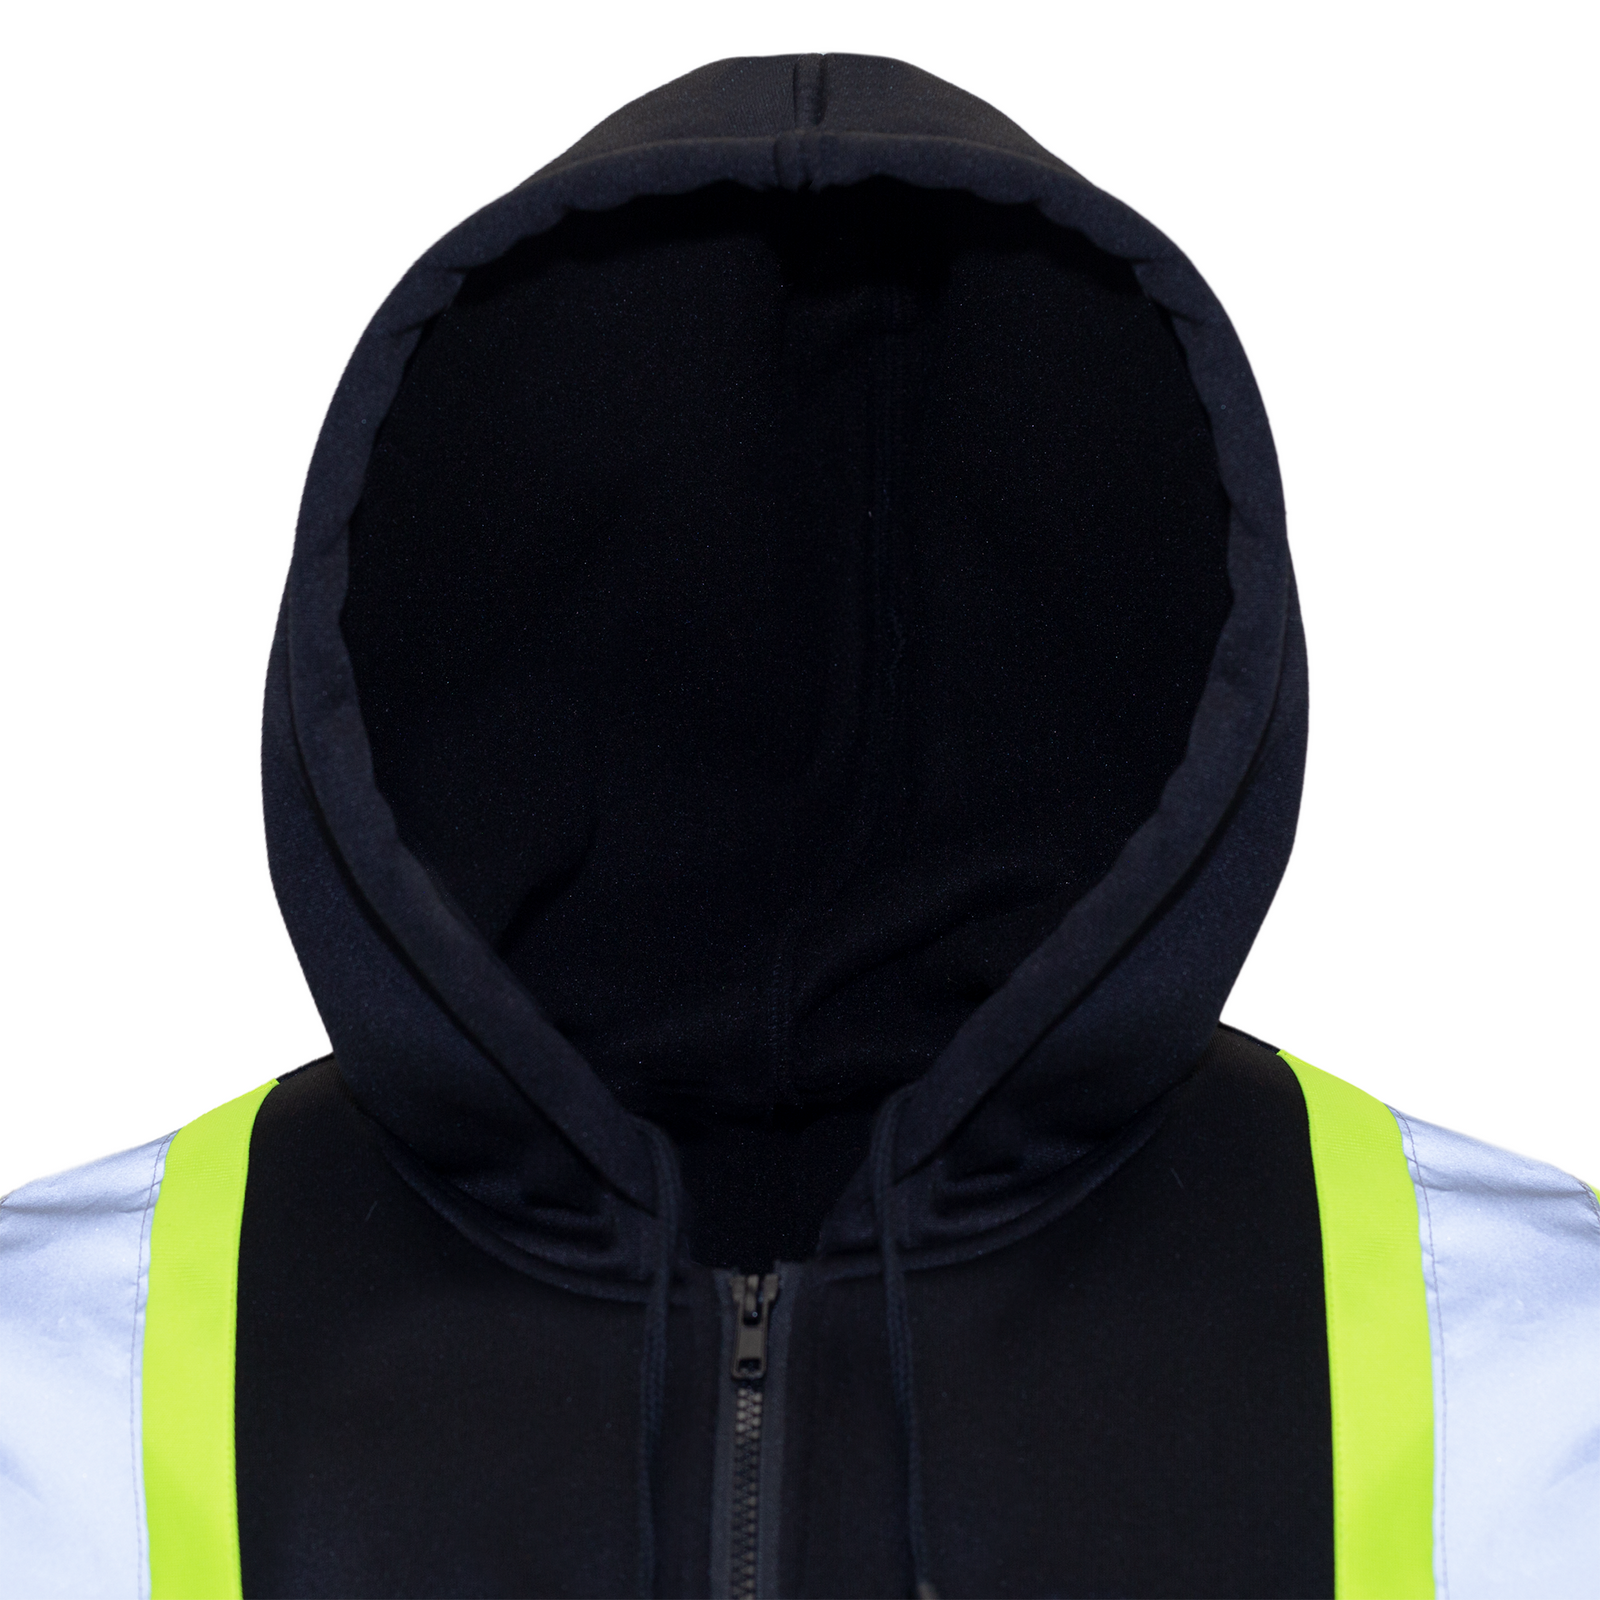 Close up to show the adjustable hoodie of the JORESTECH safety sweater with reflective stripes